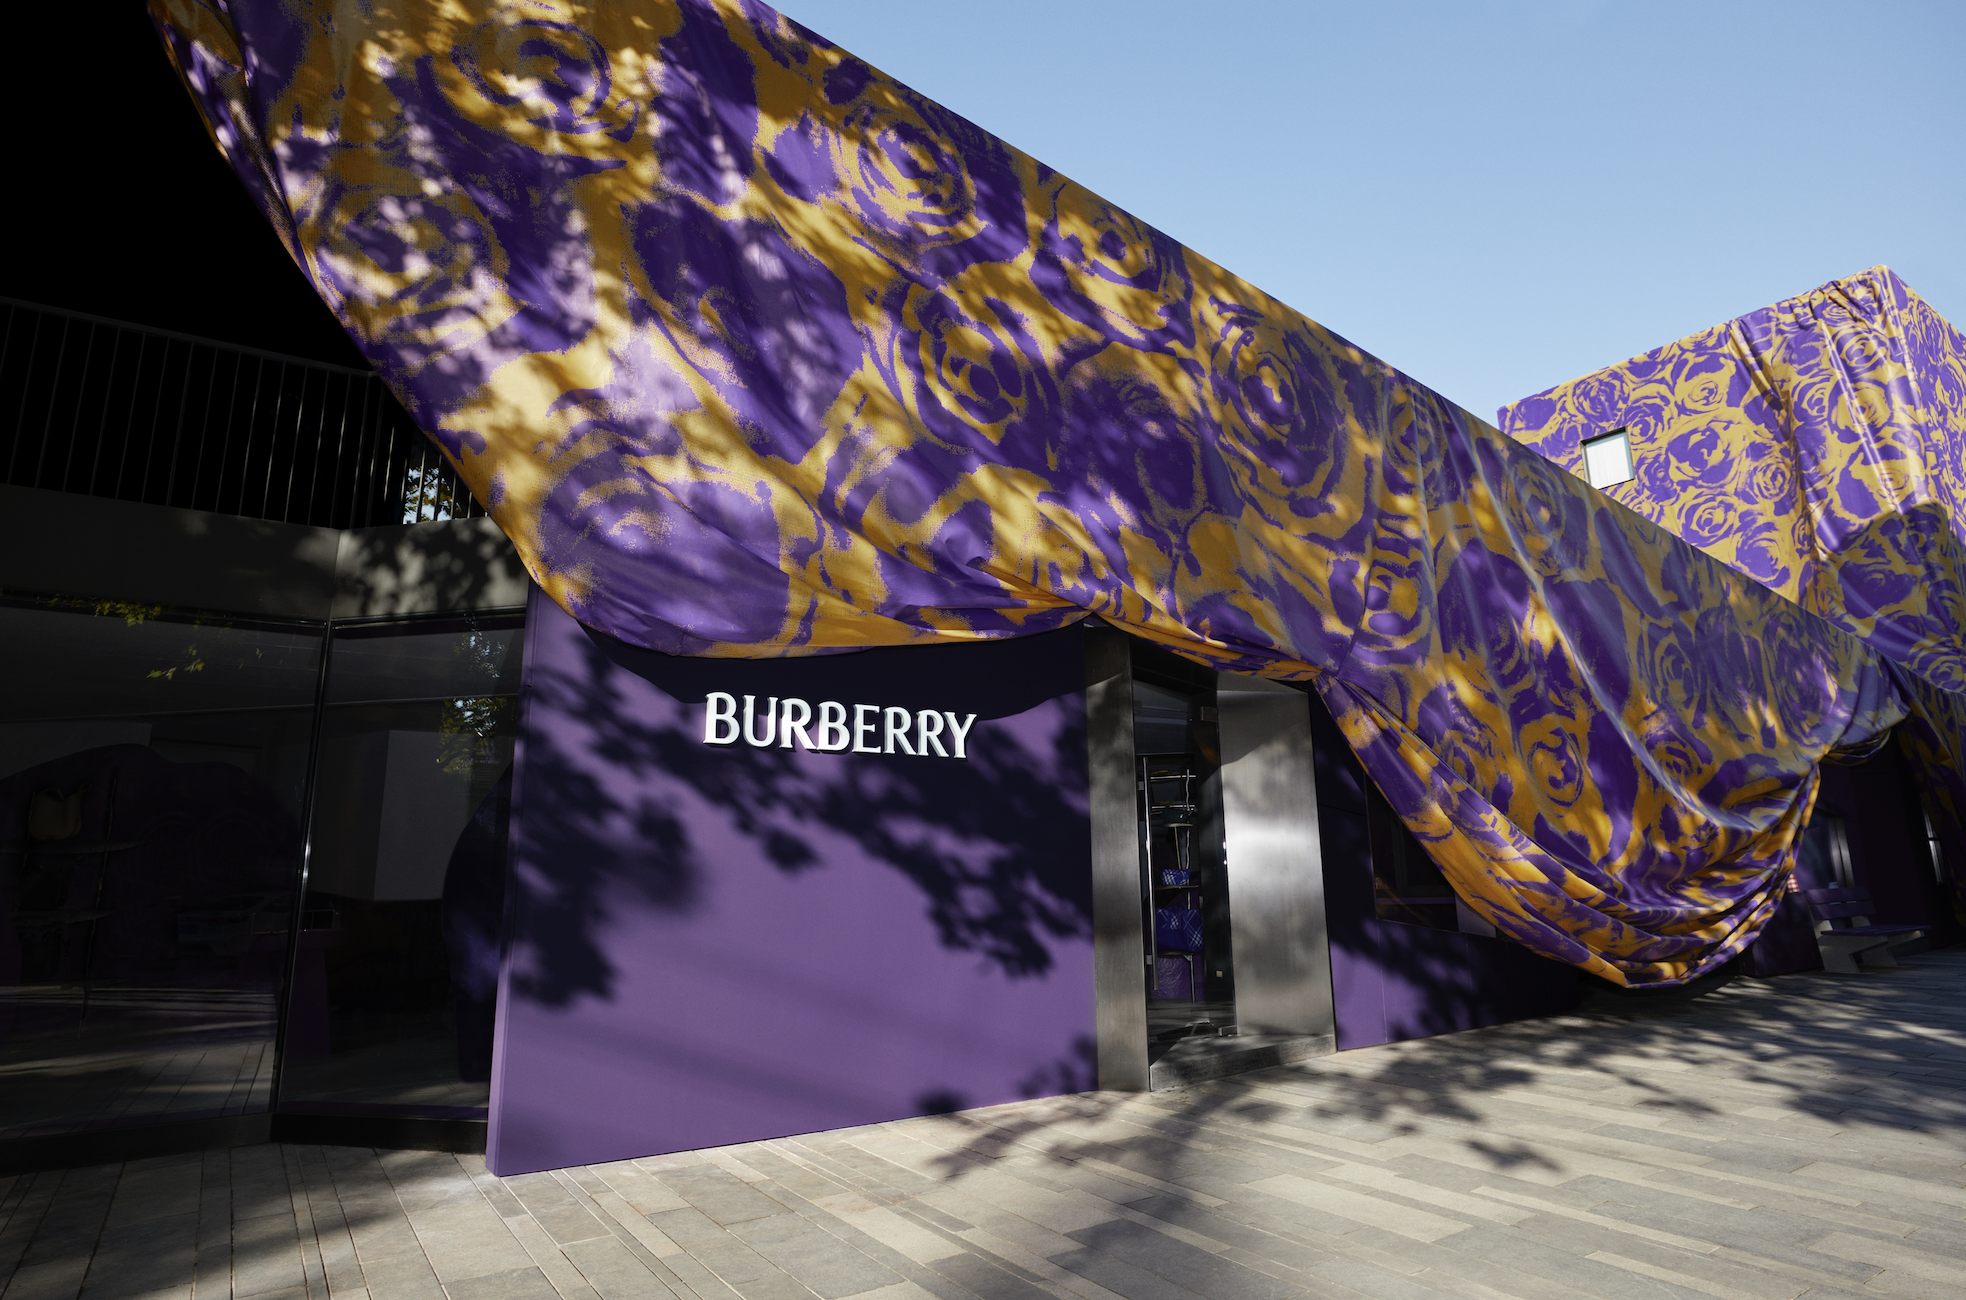 London Meets Shanghai with Burberry’s City Experience